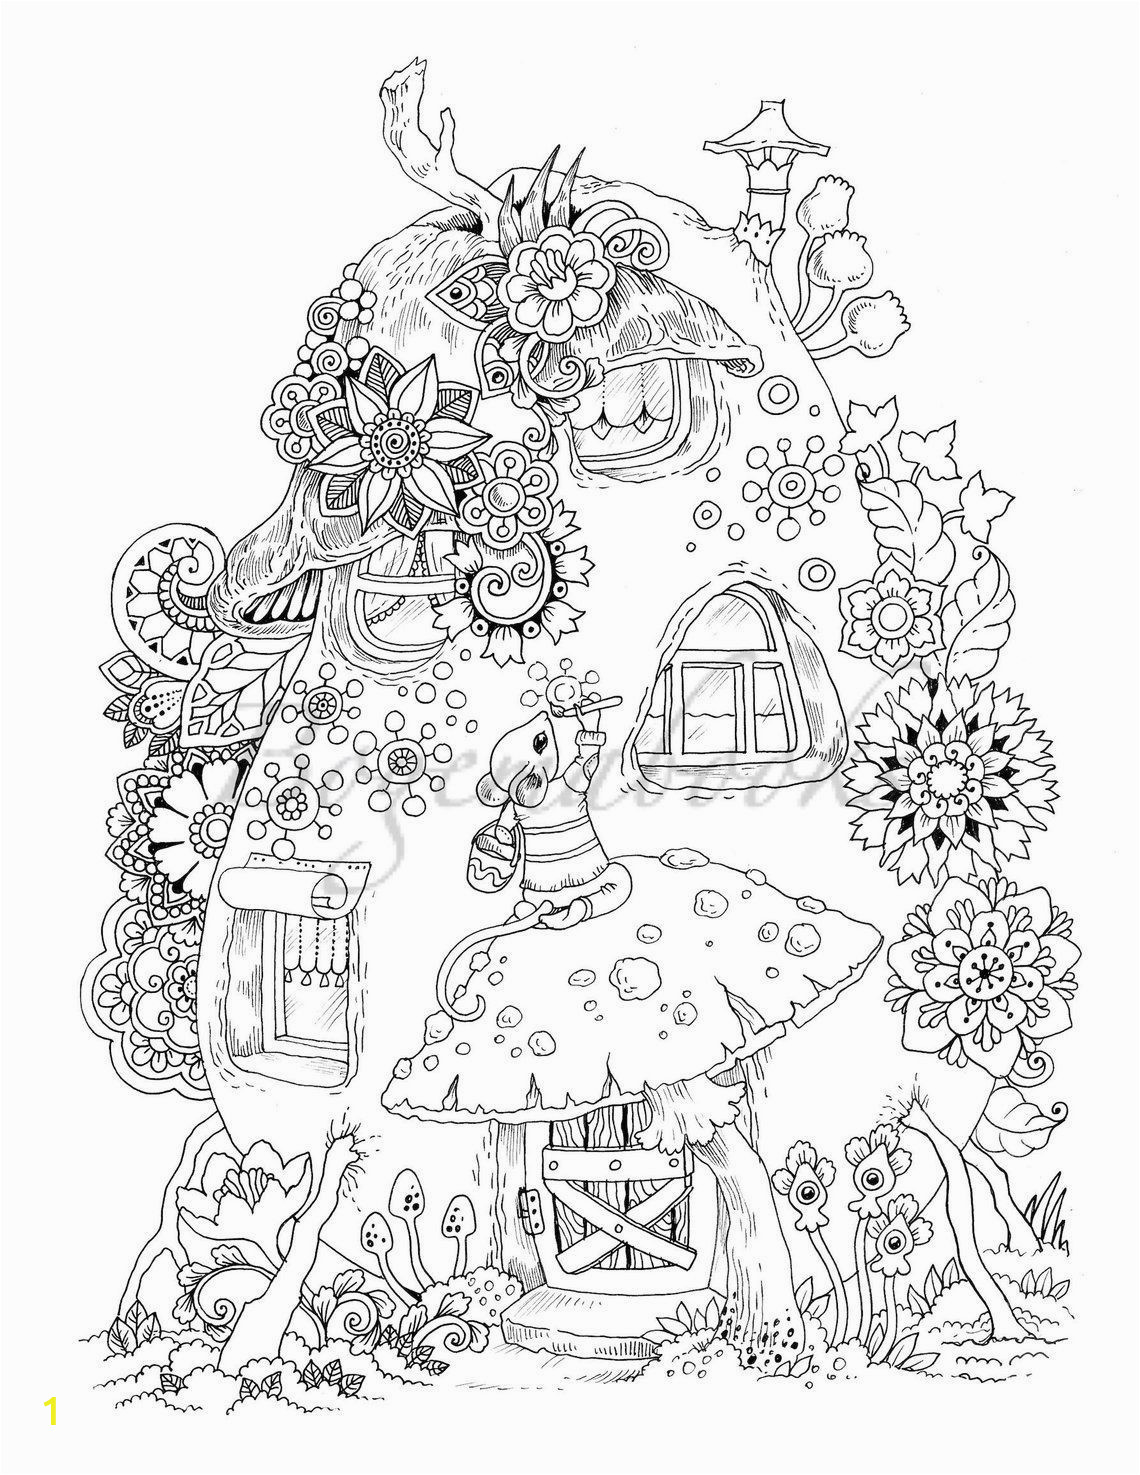 Printable Coloring Pages In Pdf Nice Little town 6 Adult Coloring Book Coloring Pages Pdf